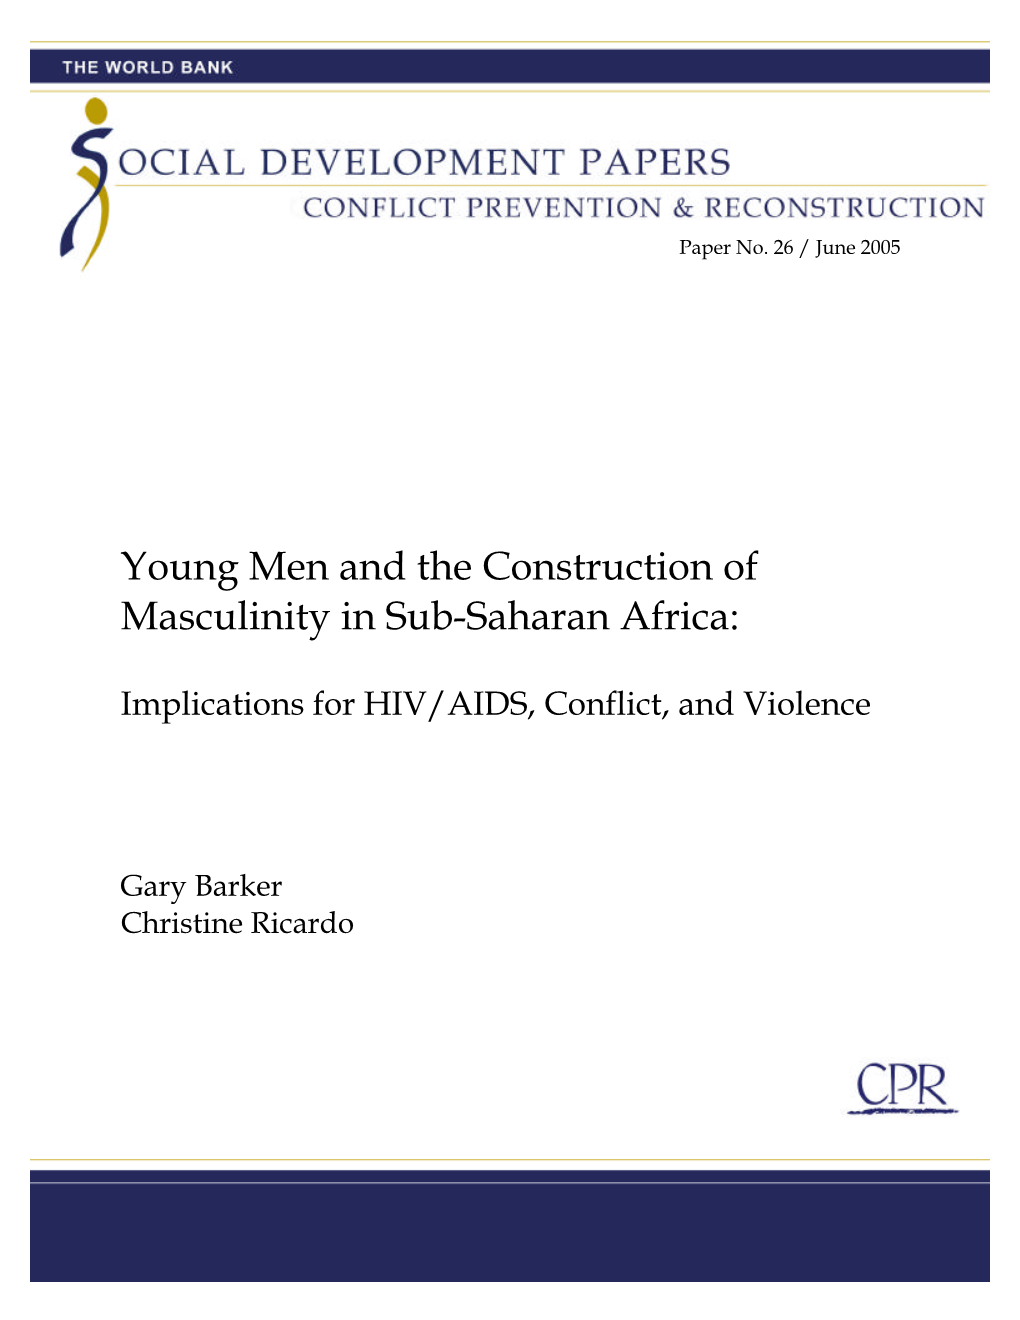 Young Men and the Construction of Masculinity in Sub-Saharan Africa